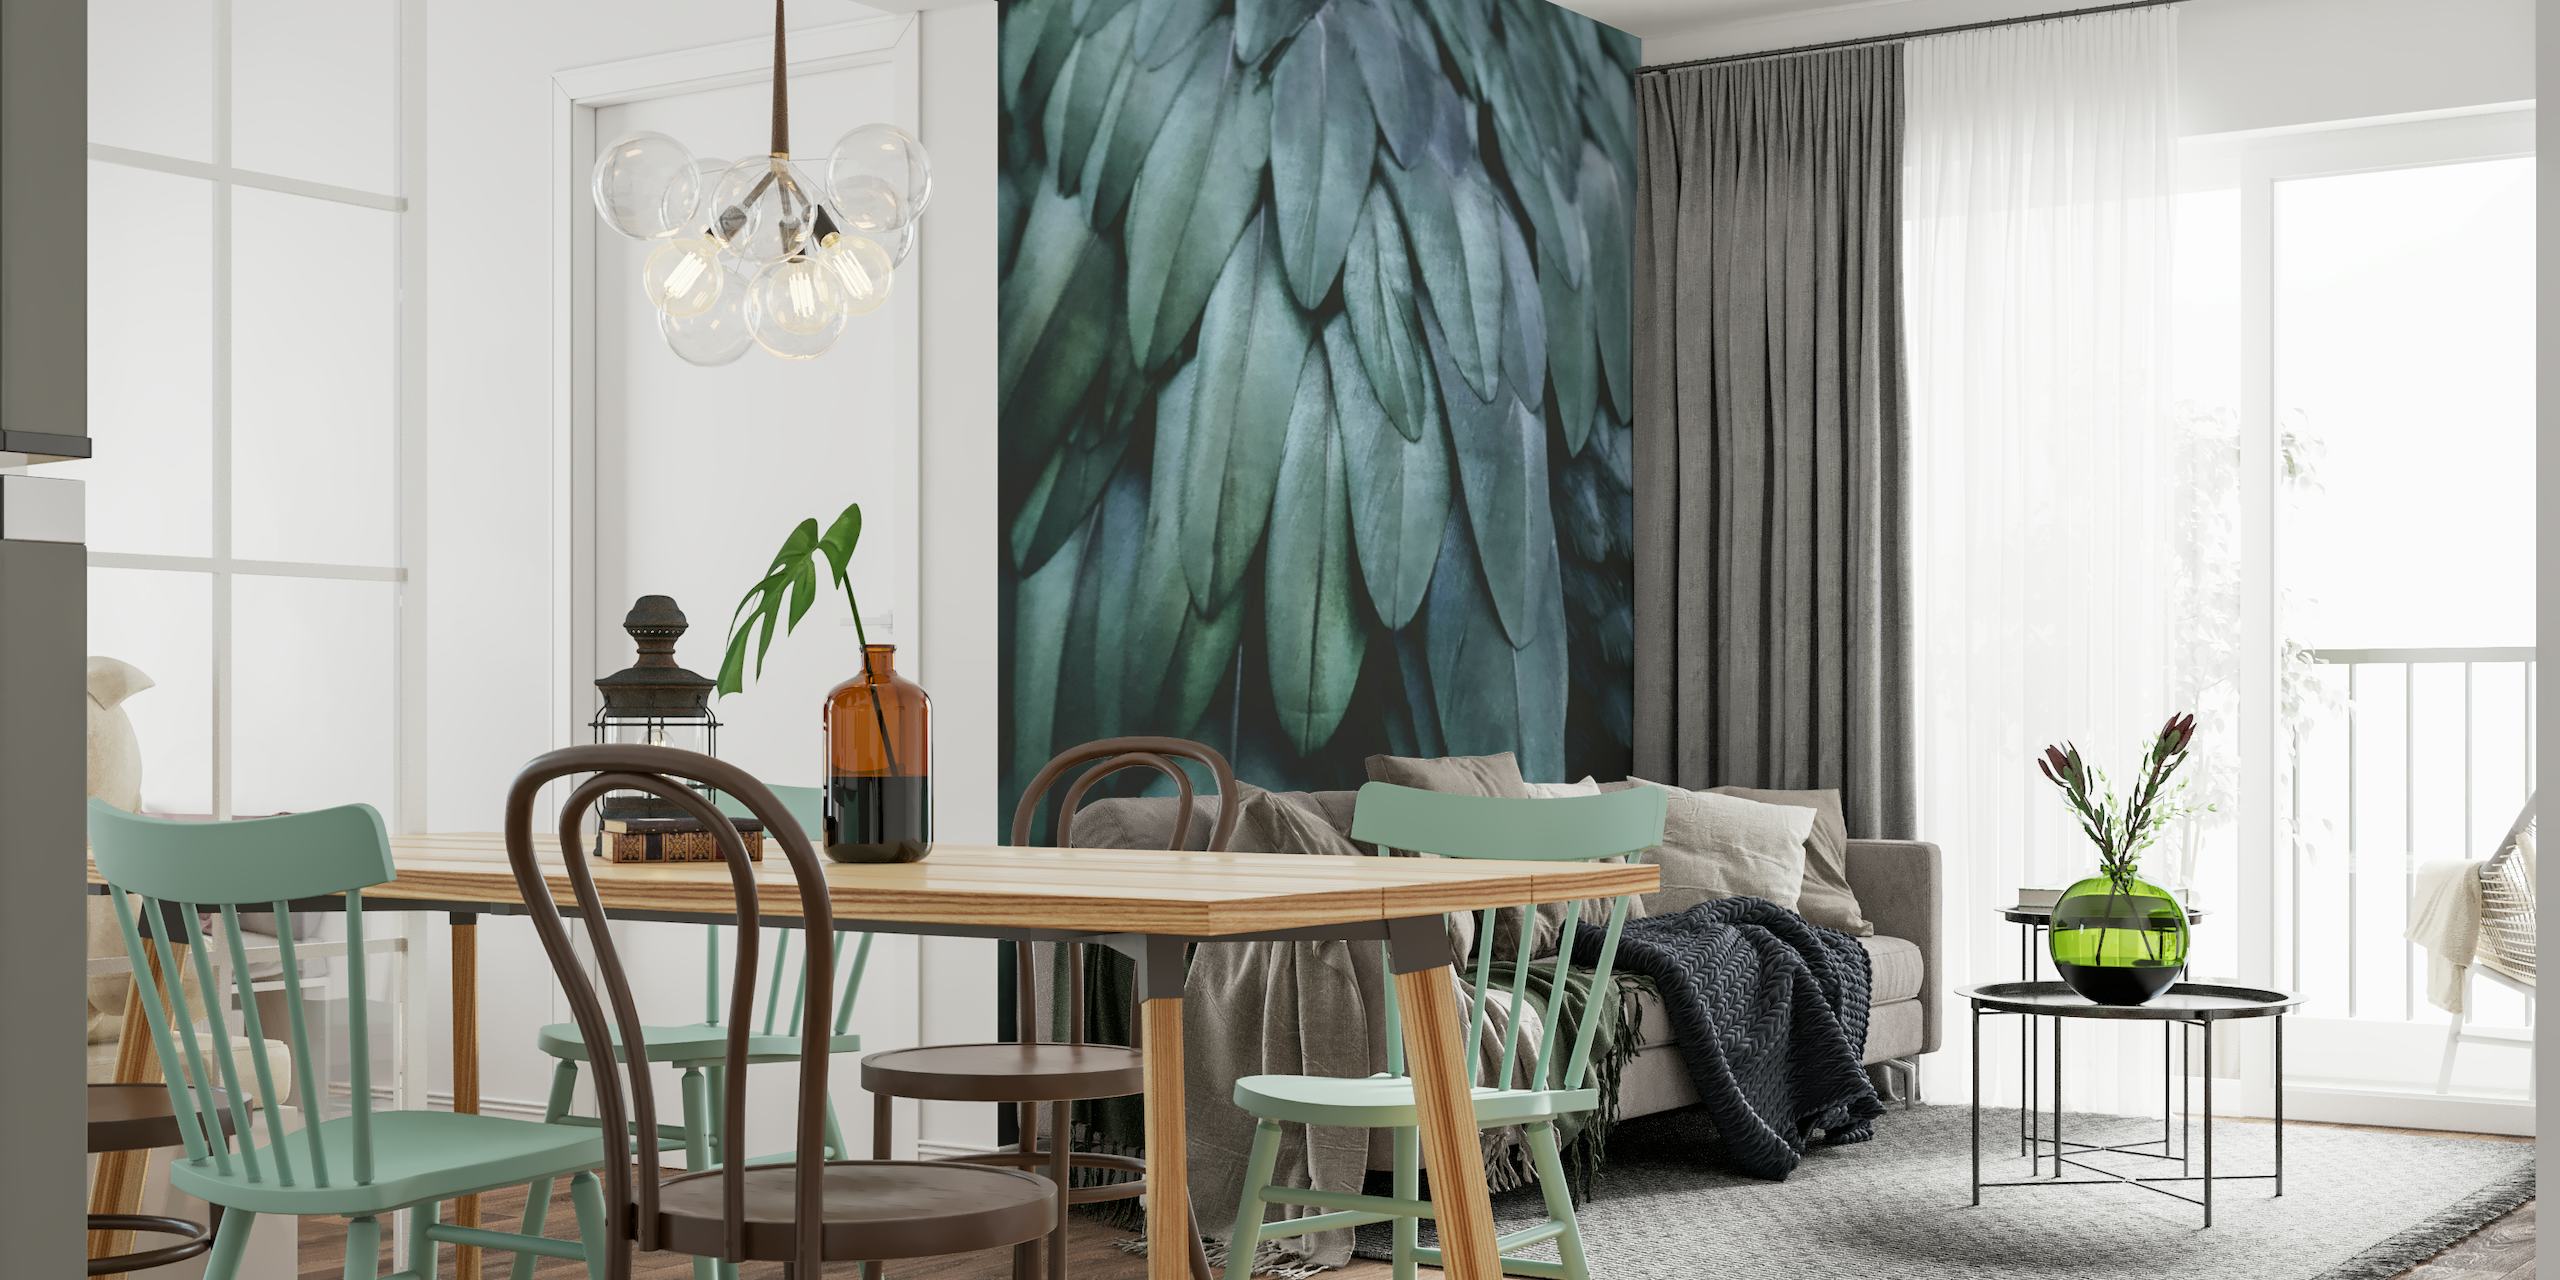 Close-up of feathers in shades of black, teal, and green, creating an elegant wall mural